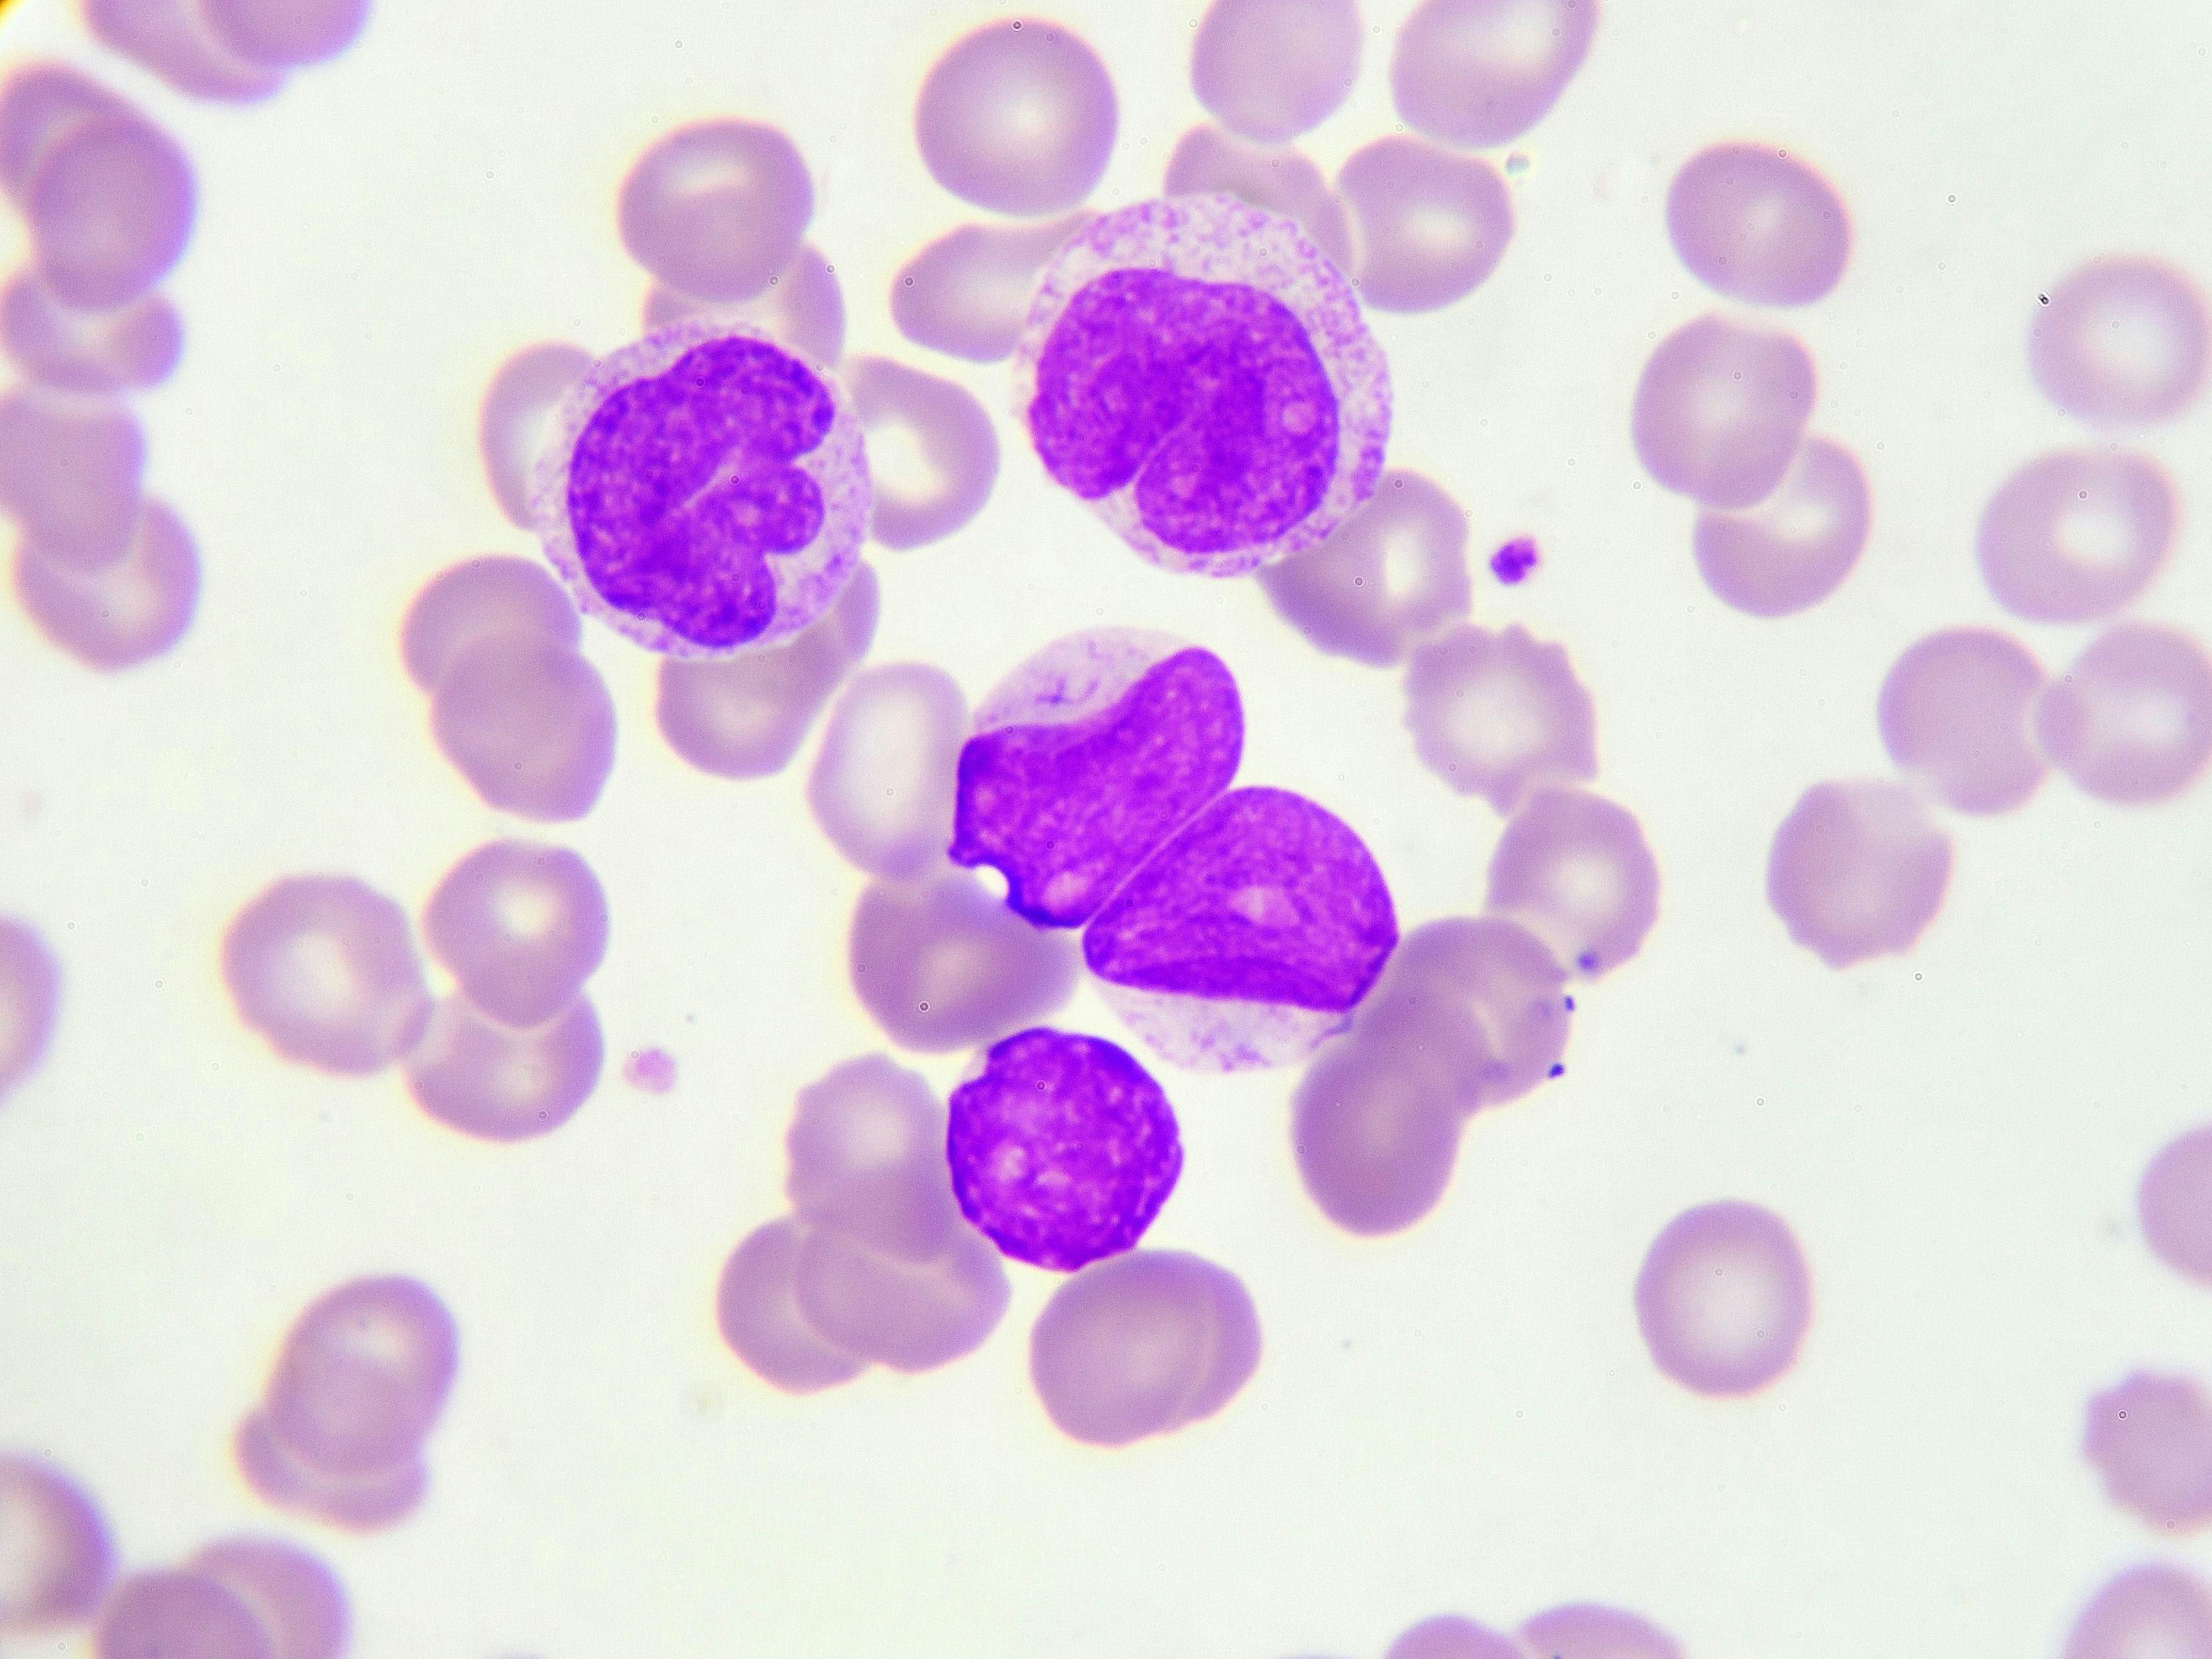 Ibrutinib Represents Possible New Treatment Option for Pretreated Hairy Cell Leukemia